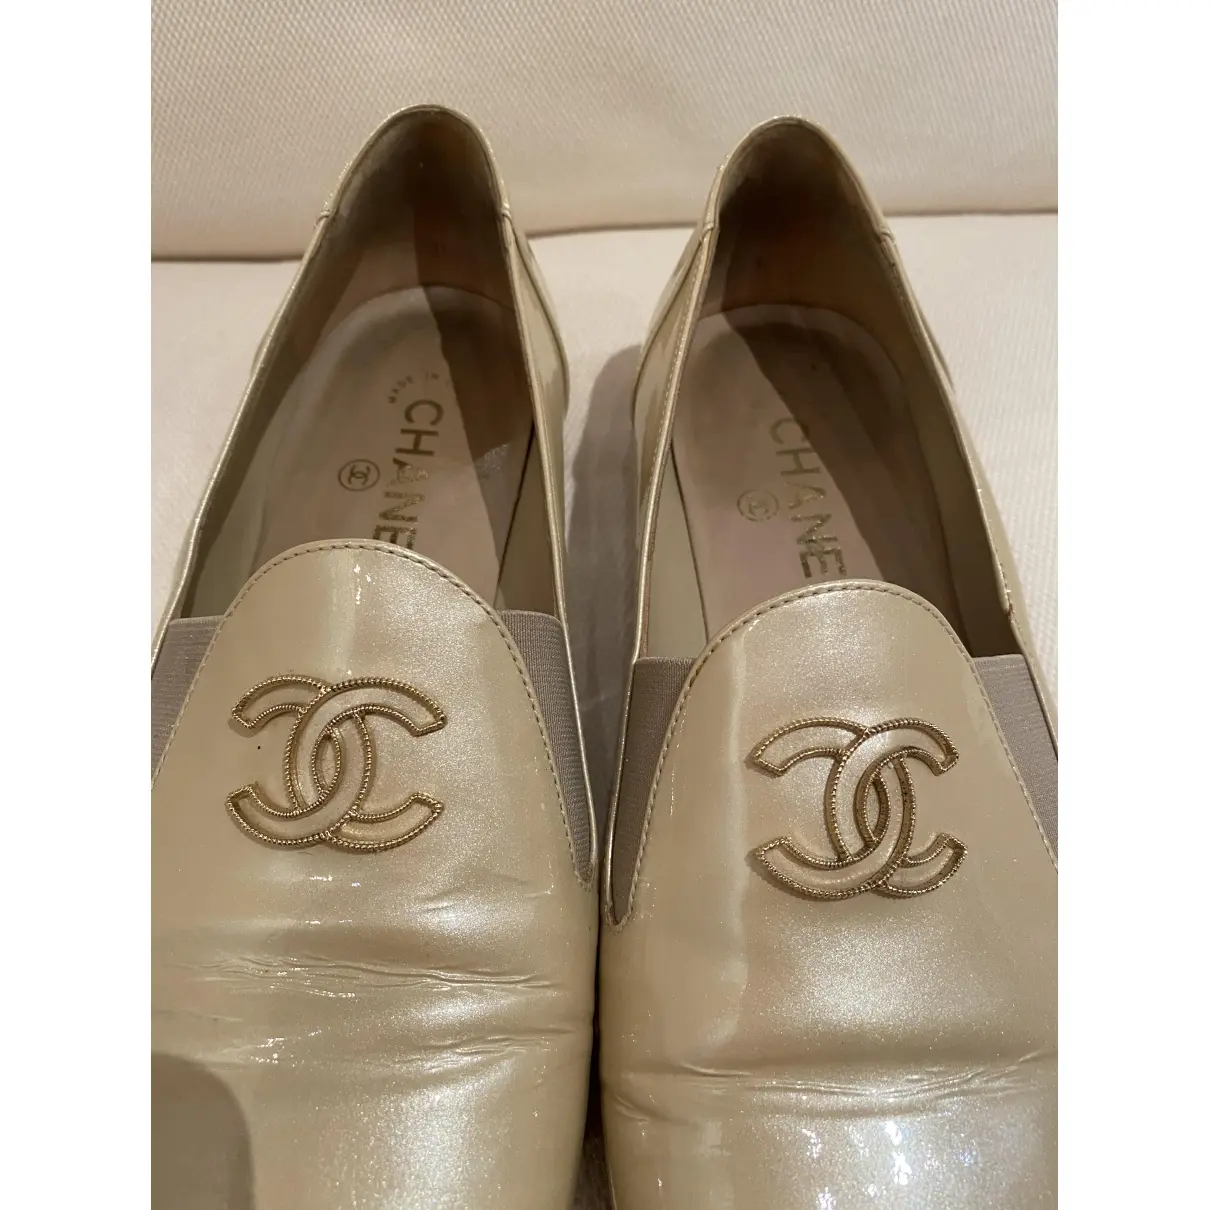 Patent leather flats Chanel